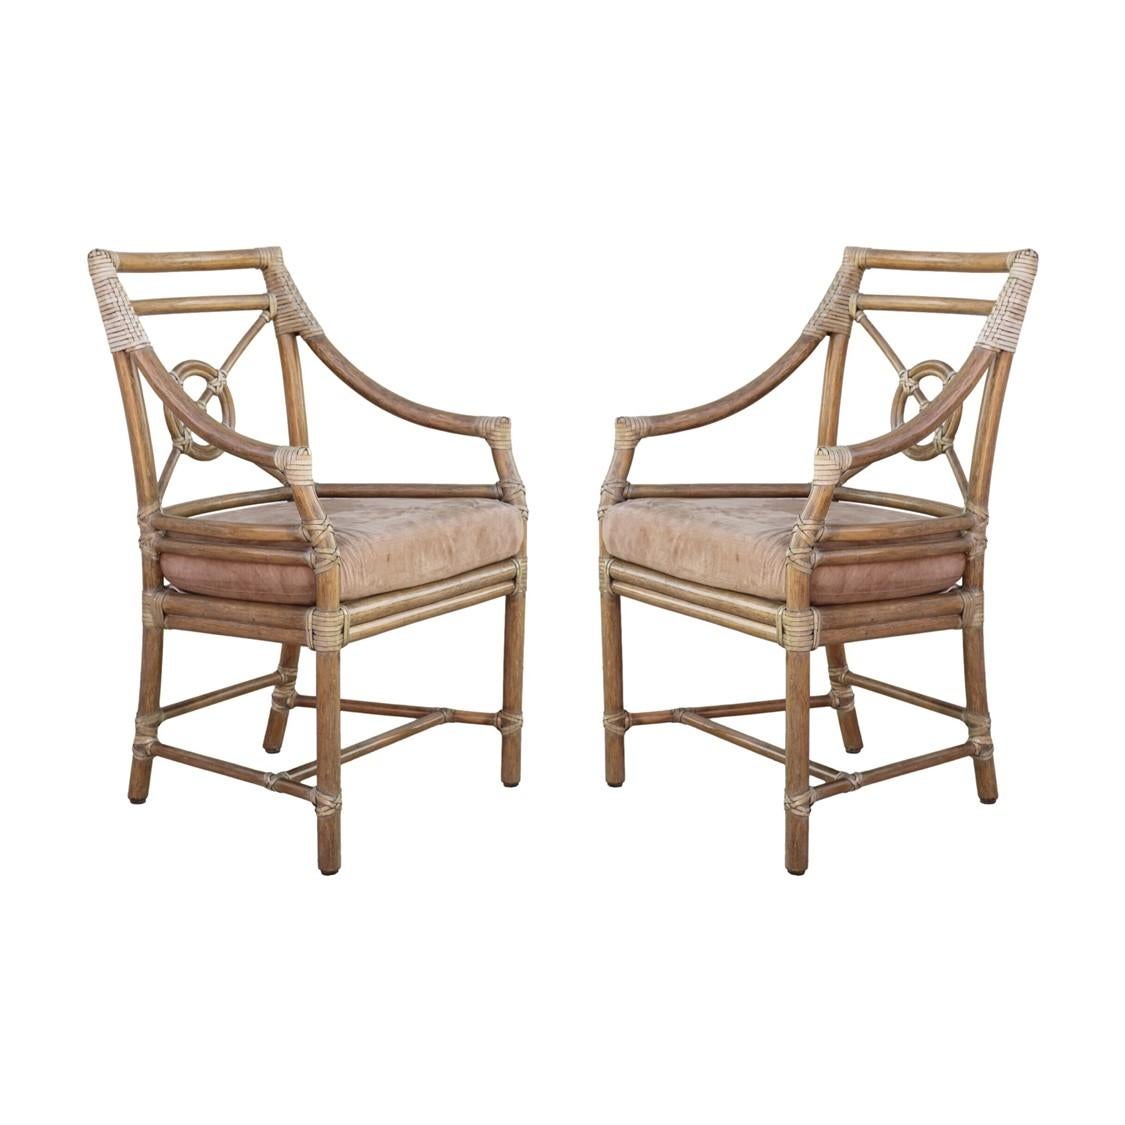 A pair of rattan arm chairs or dining chairs designed by breakthrough innovator Elinor McGuire in the California organic modern style. These impeccably crafted chairs display an open rattan back, which frames McGuire's iconic Rattan Target design.